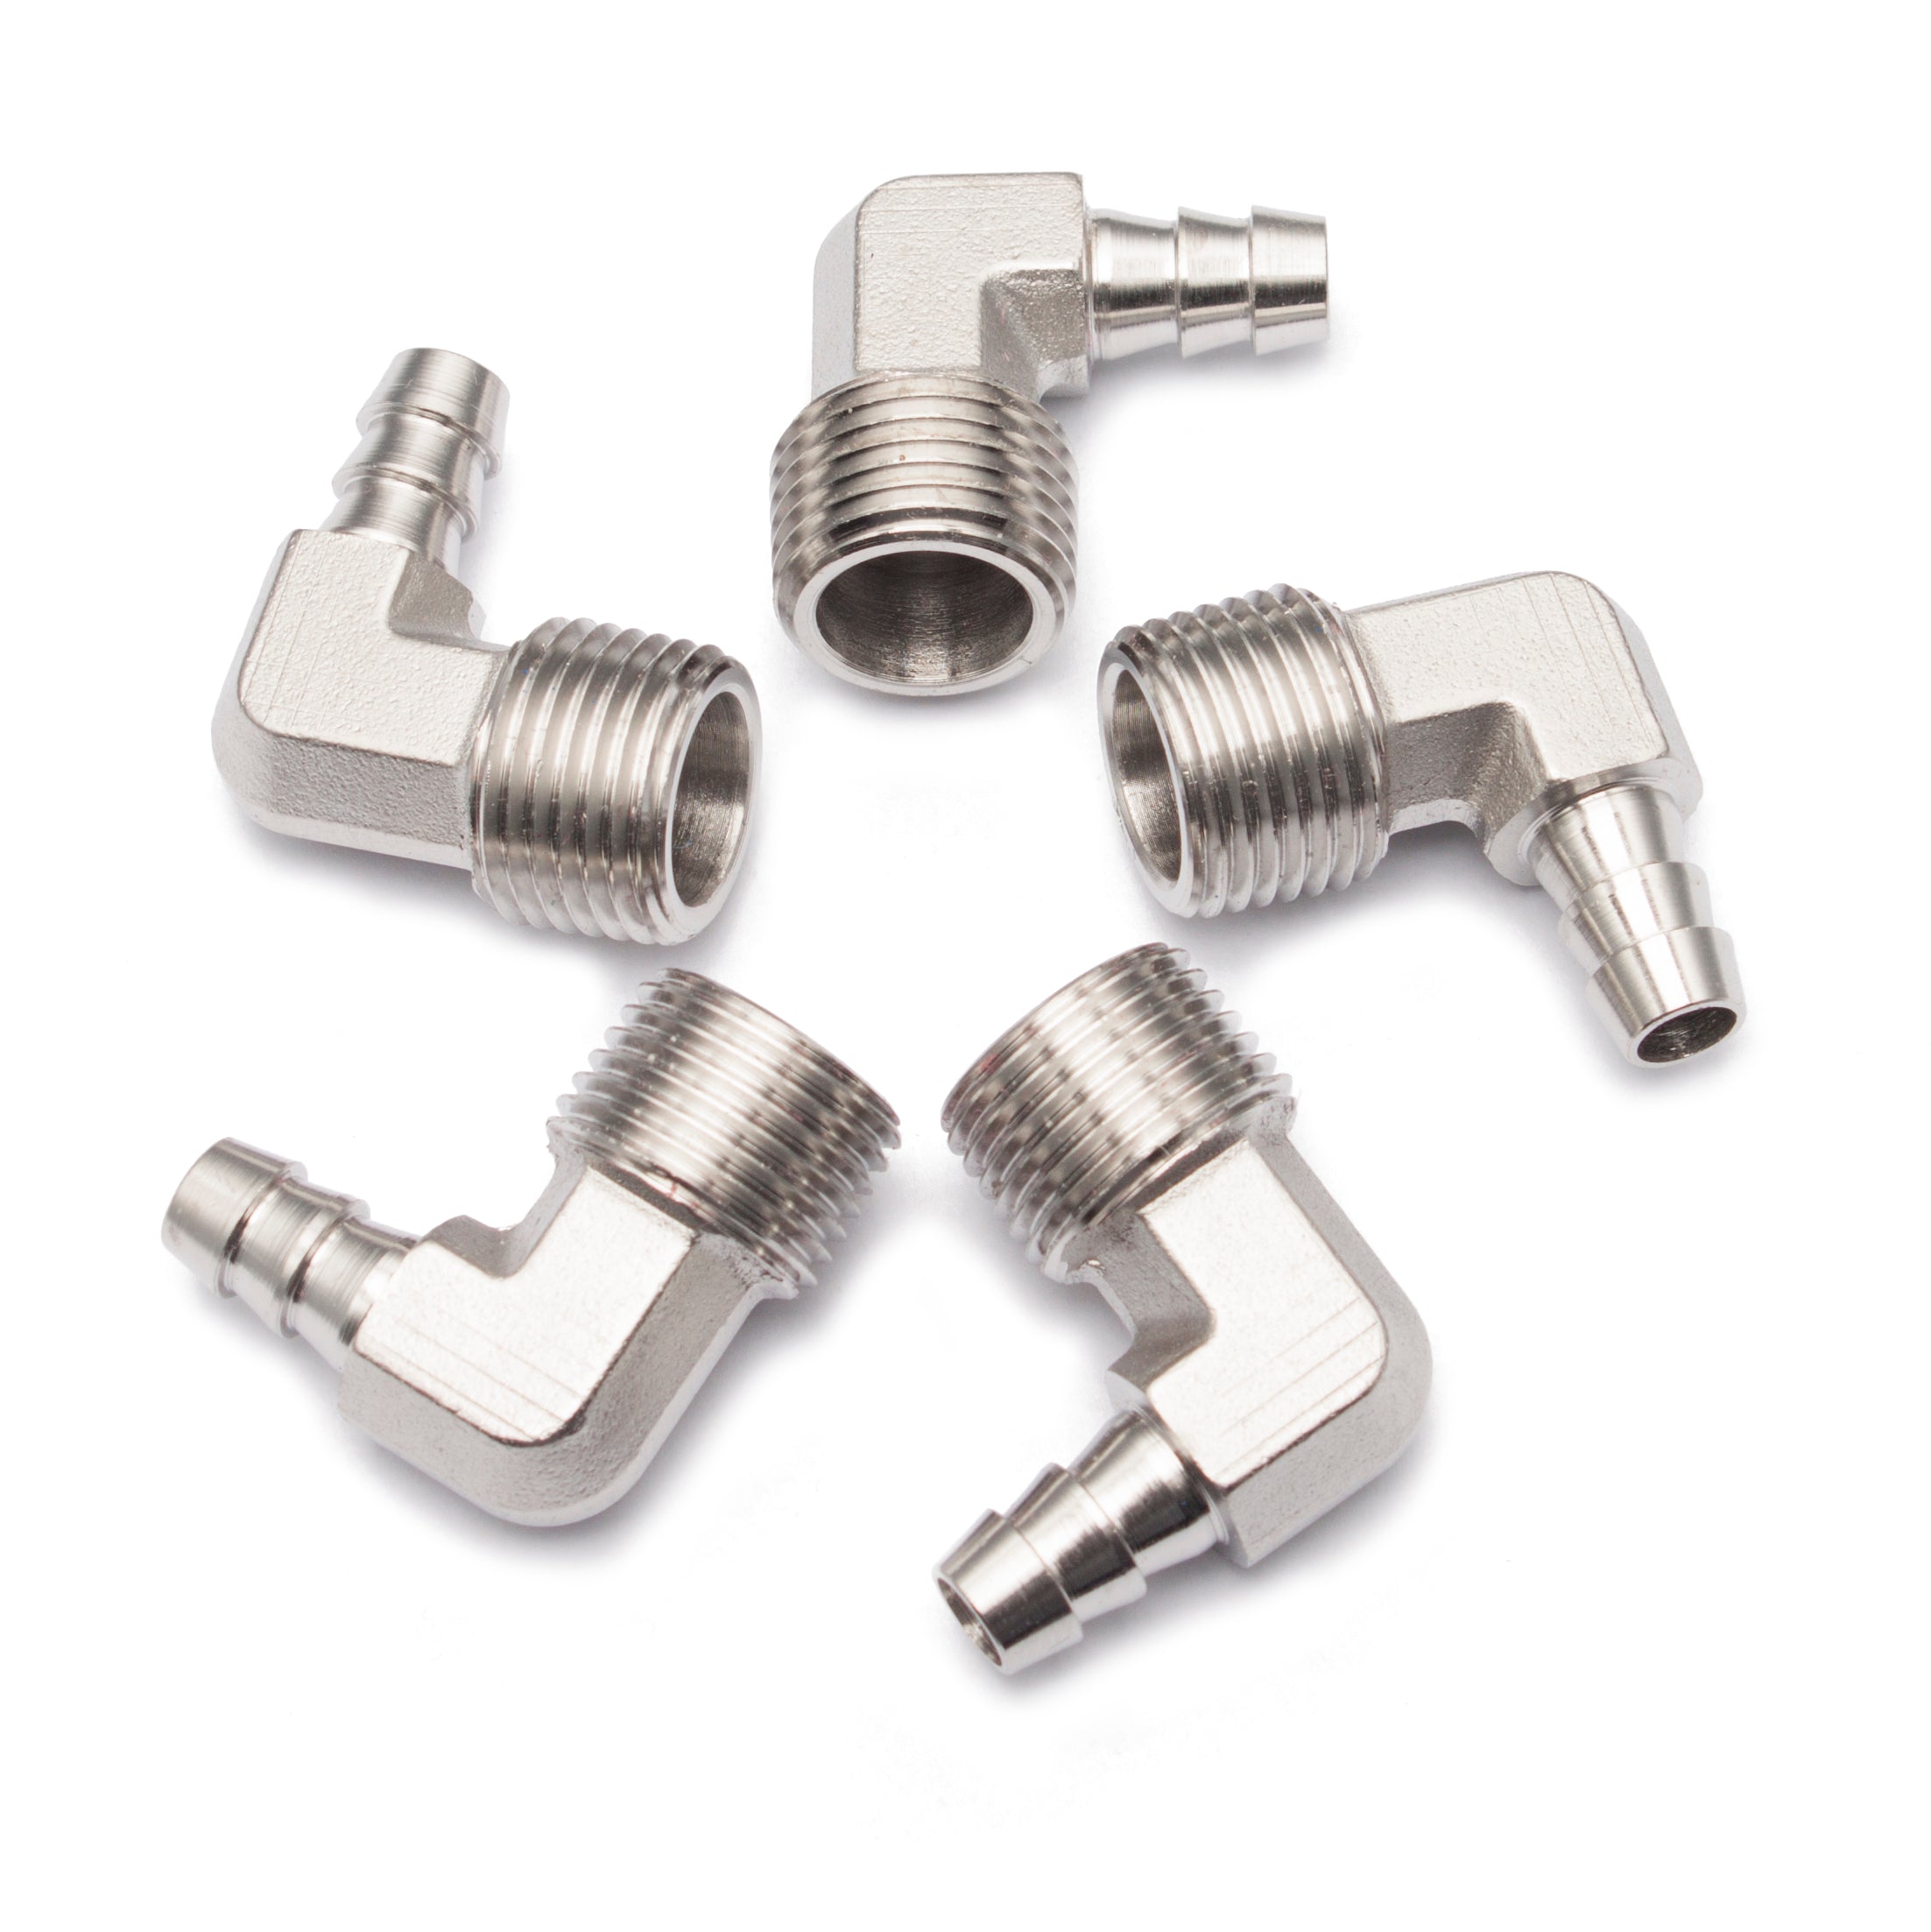 LTWFITTING 90 Degree Elbow Stainless Steel 316 Barb Fitting 3/8 Inch Hose Barb x 1/2 Inch Male NPT Air Gas (Pack of 5)